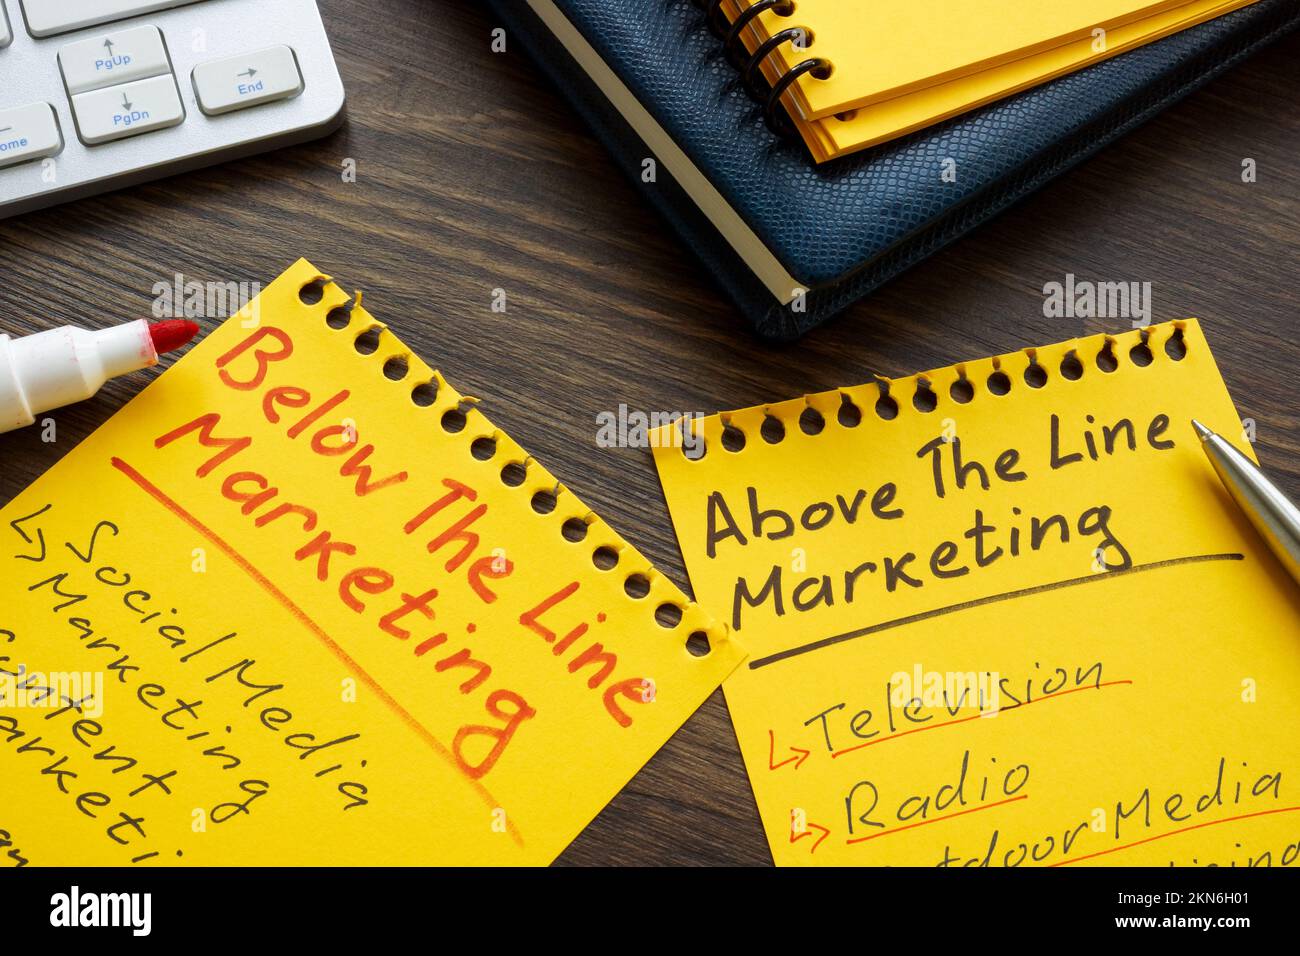 Pages with Below the line BTL marketing and above the line ATL marketing phrases. Stock Photo